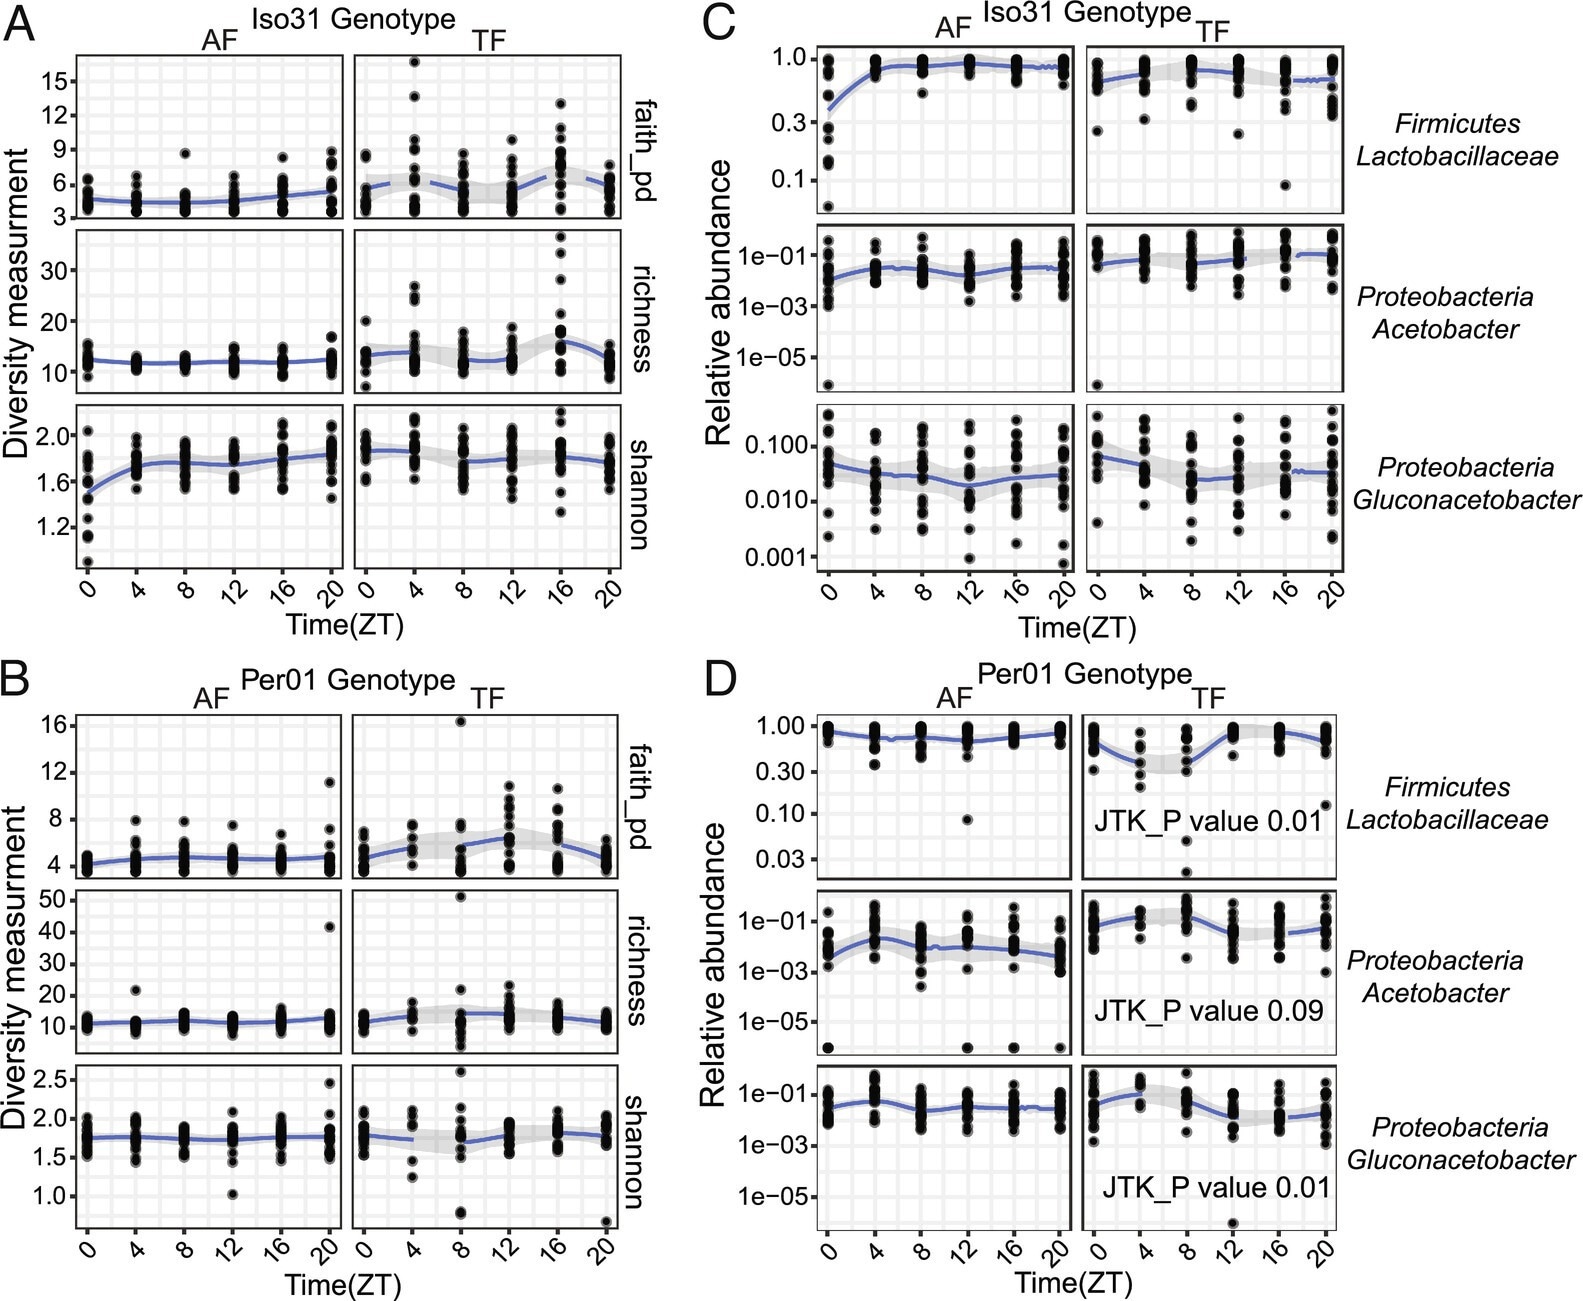 The Drosophila intestinal microbiome is largely stable over a daily cycle.  (A and B) Microbiome diversity does not show diurnal oscillations in wild type Iso31 or clock mutant per01 fly guts under ad−lib (AF) or TF conditions.  JTK_cycle was used to assess rhythmicity.  (C and D) Specific bacterial species cycle under TF conditions, but only in per01.  JTK_cycle values ​​are shown.